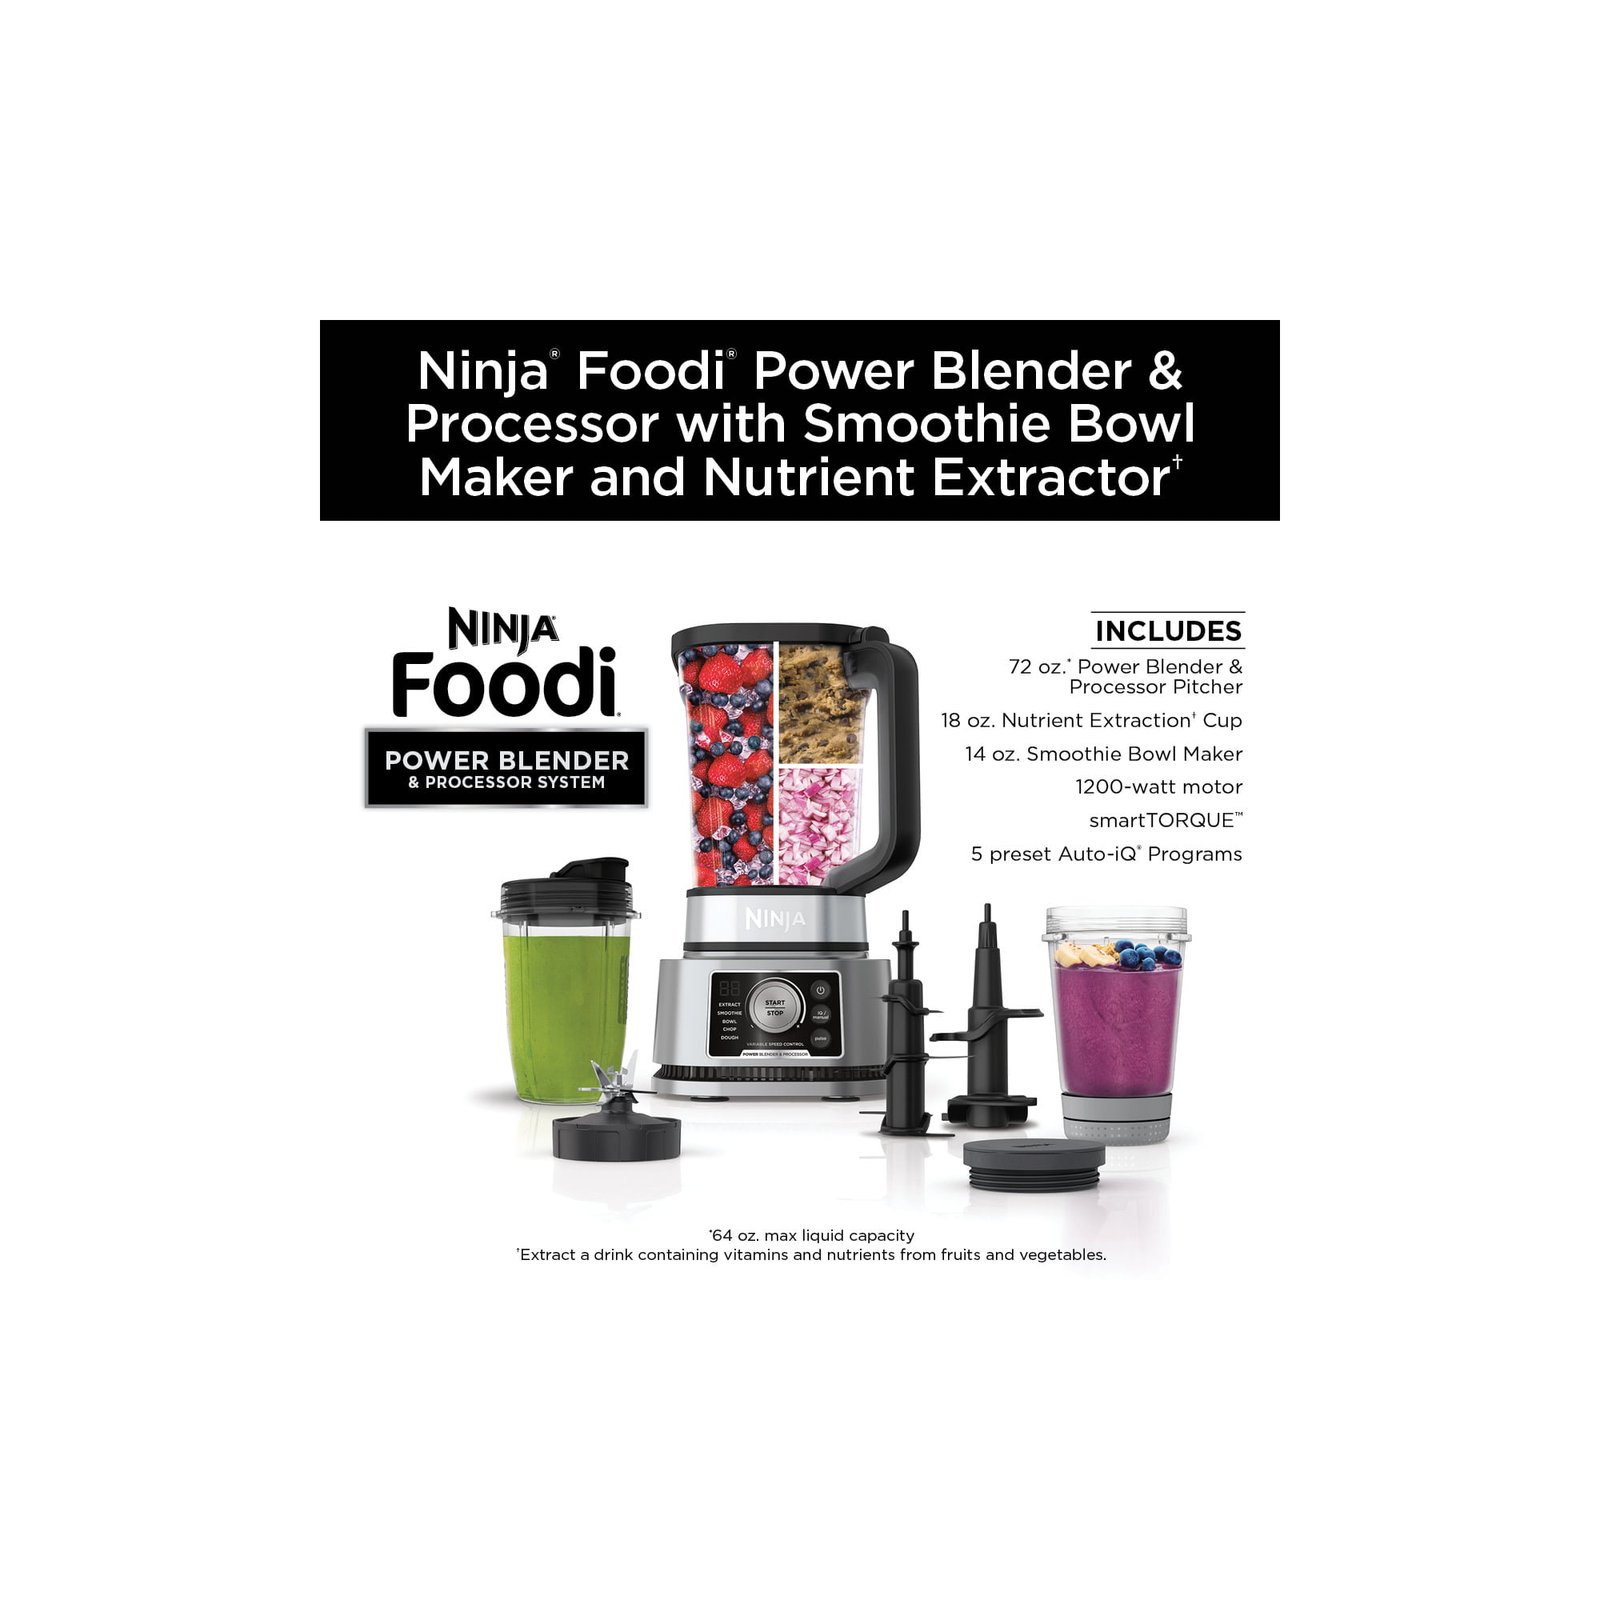 https://themarketdepot.com/wp-content/uploads/2023/01/Ninja%C2%AE-Foodi%C2%AE-72-oz-Power-Blender-Processor-System-with-Smoothie-Bowl-Maker-Nutrient-Extractor-1200W-1.jpeg